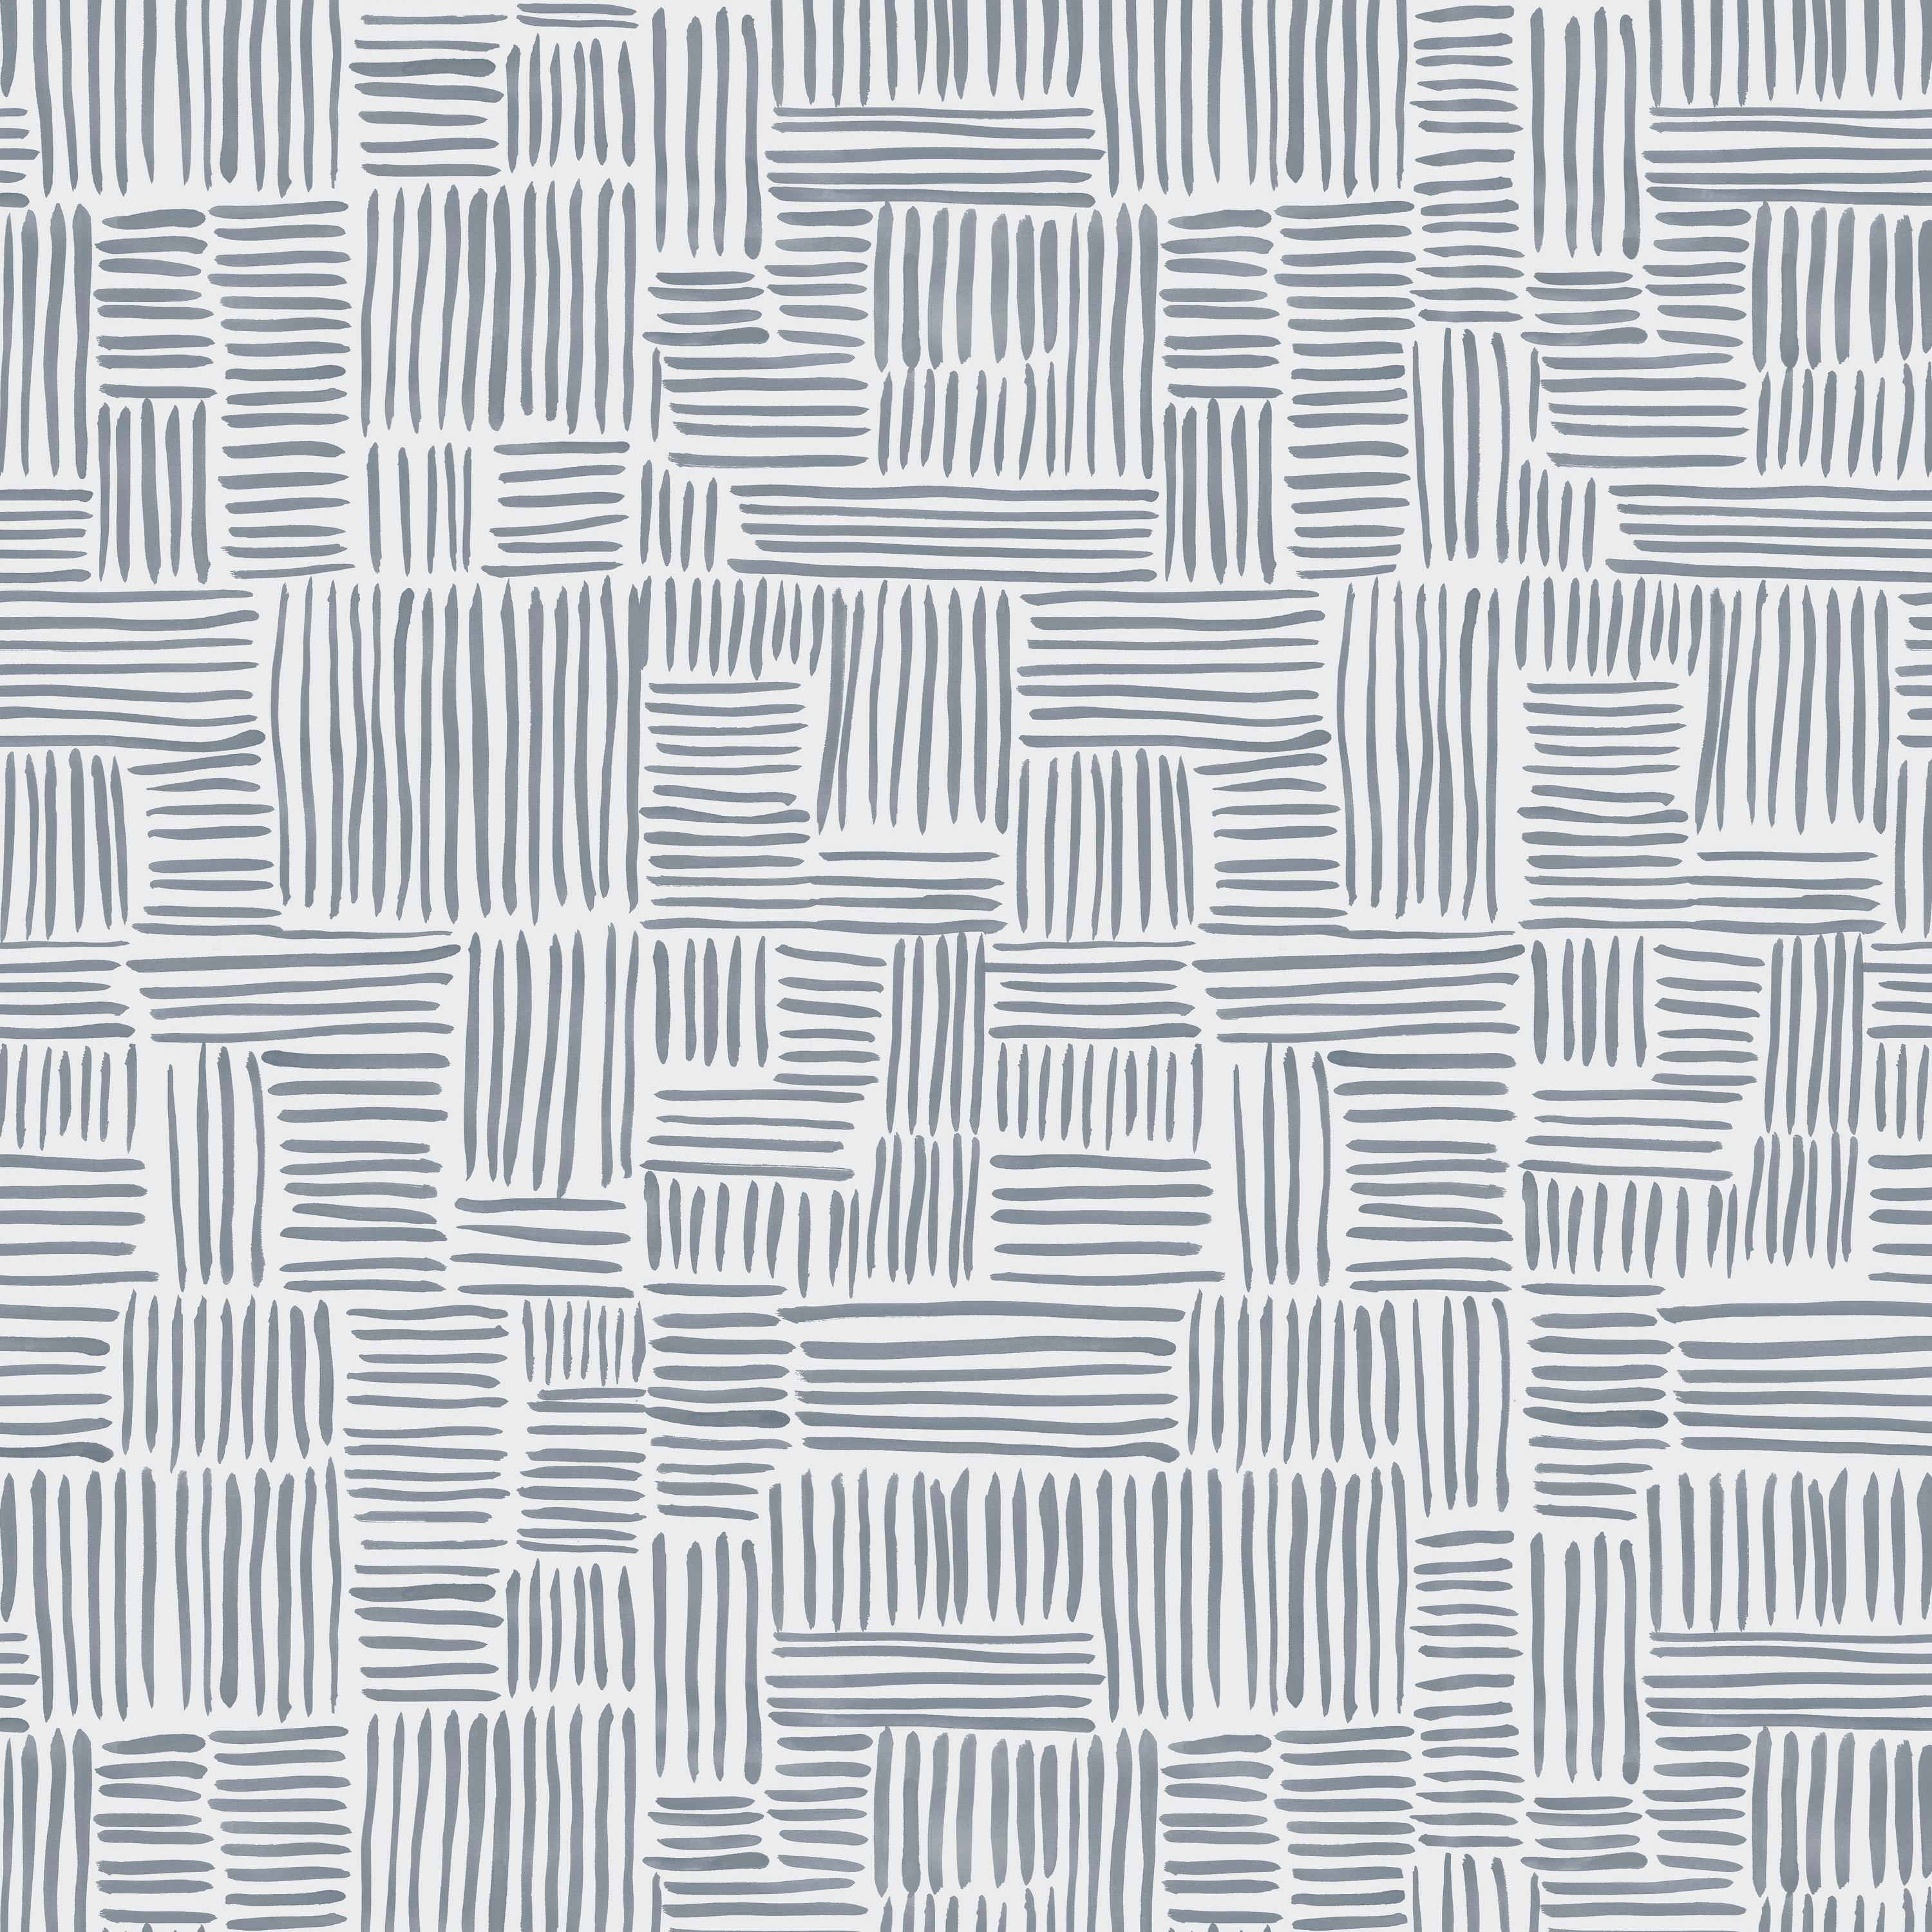 Detail of wallpaper in a directional dash pattern in blue-gray on a white field.